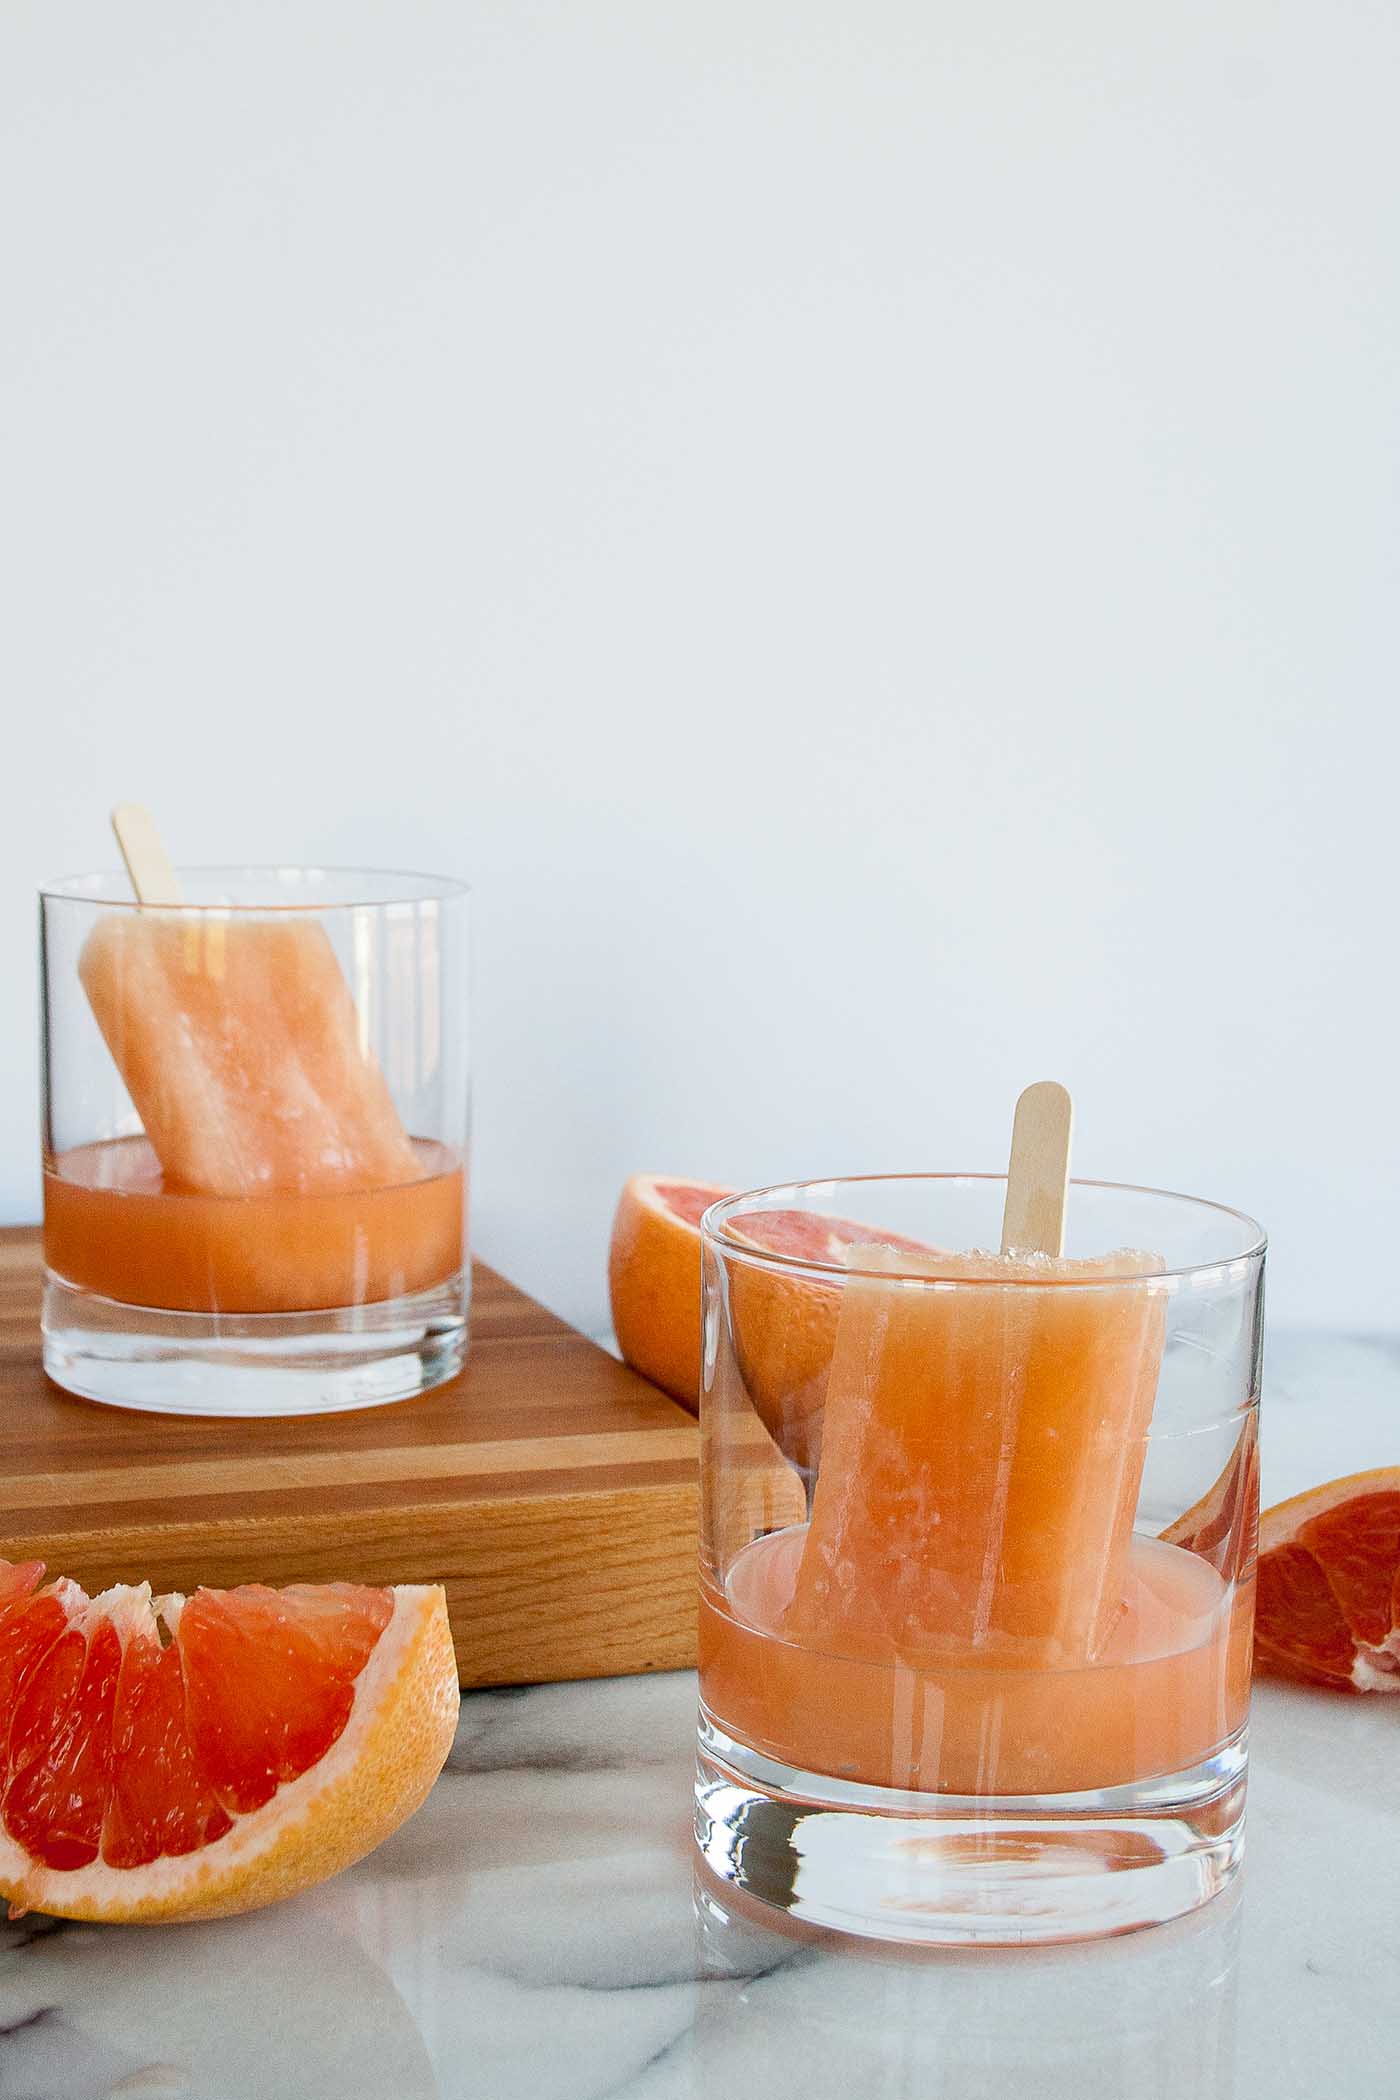 greyhound boozy popsicles are perfect for summer! tart fresh grapefruit juice is balanced by a homemade rosemary simple syrup, these alcohol popsicles are going to be your new go-to for summer entertaining! | summer drinks, homemade alcohol popsicle recipe, boozy popsicle recipe, girls night, summer party, greyhound cocktail, vodka cocktail |